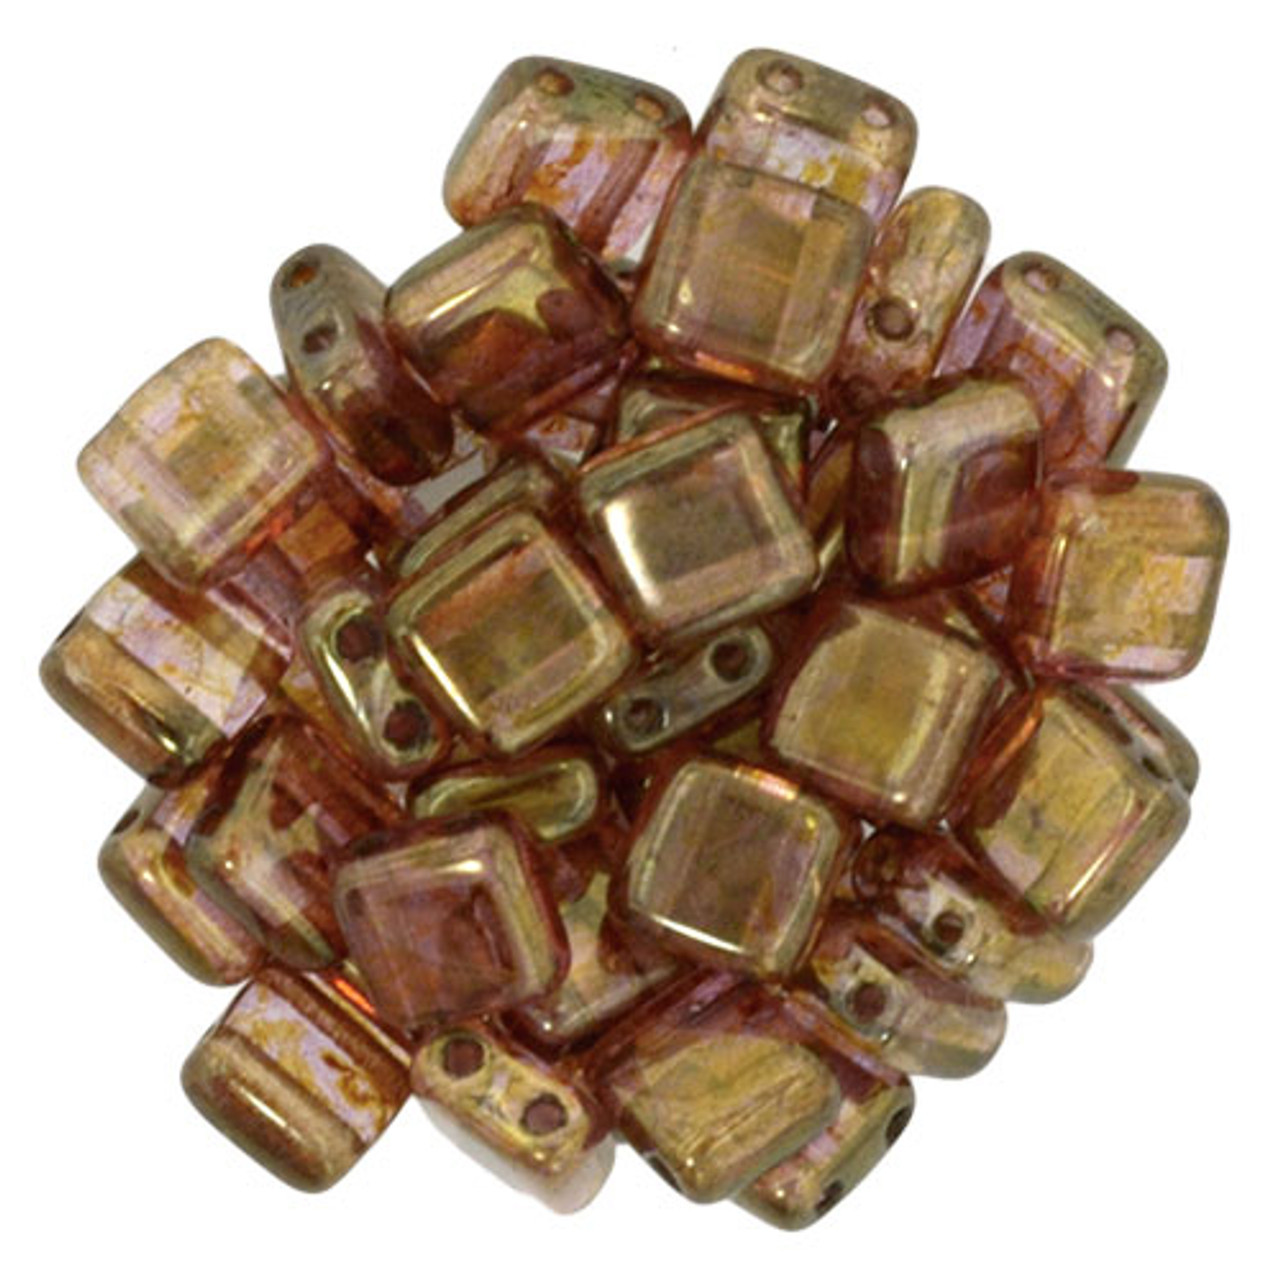 6mm Czech Two Hole Tile Beads - Luster Opaque Rose-Gold Topaz